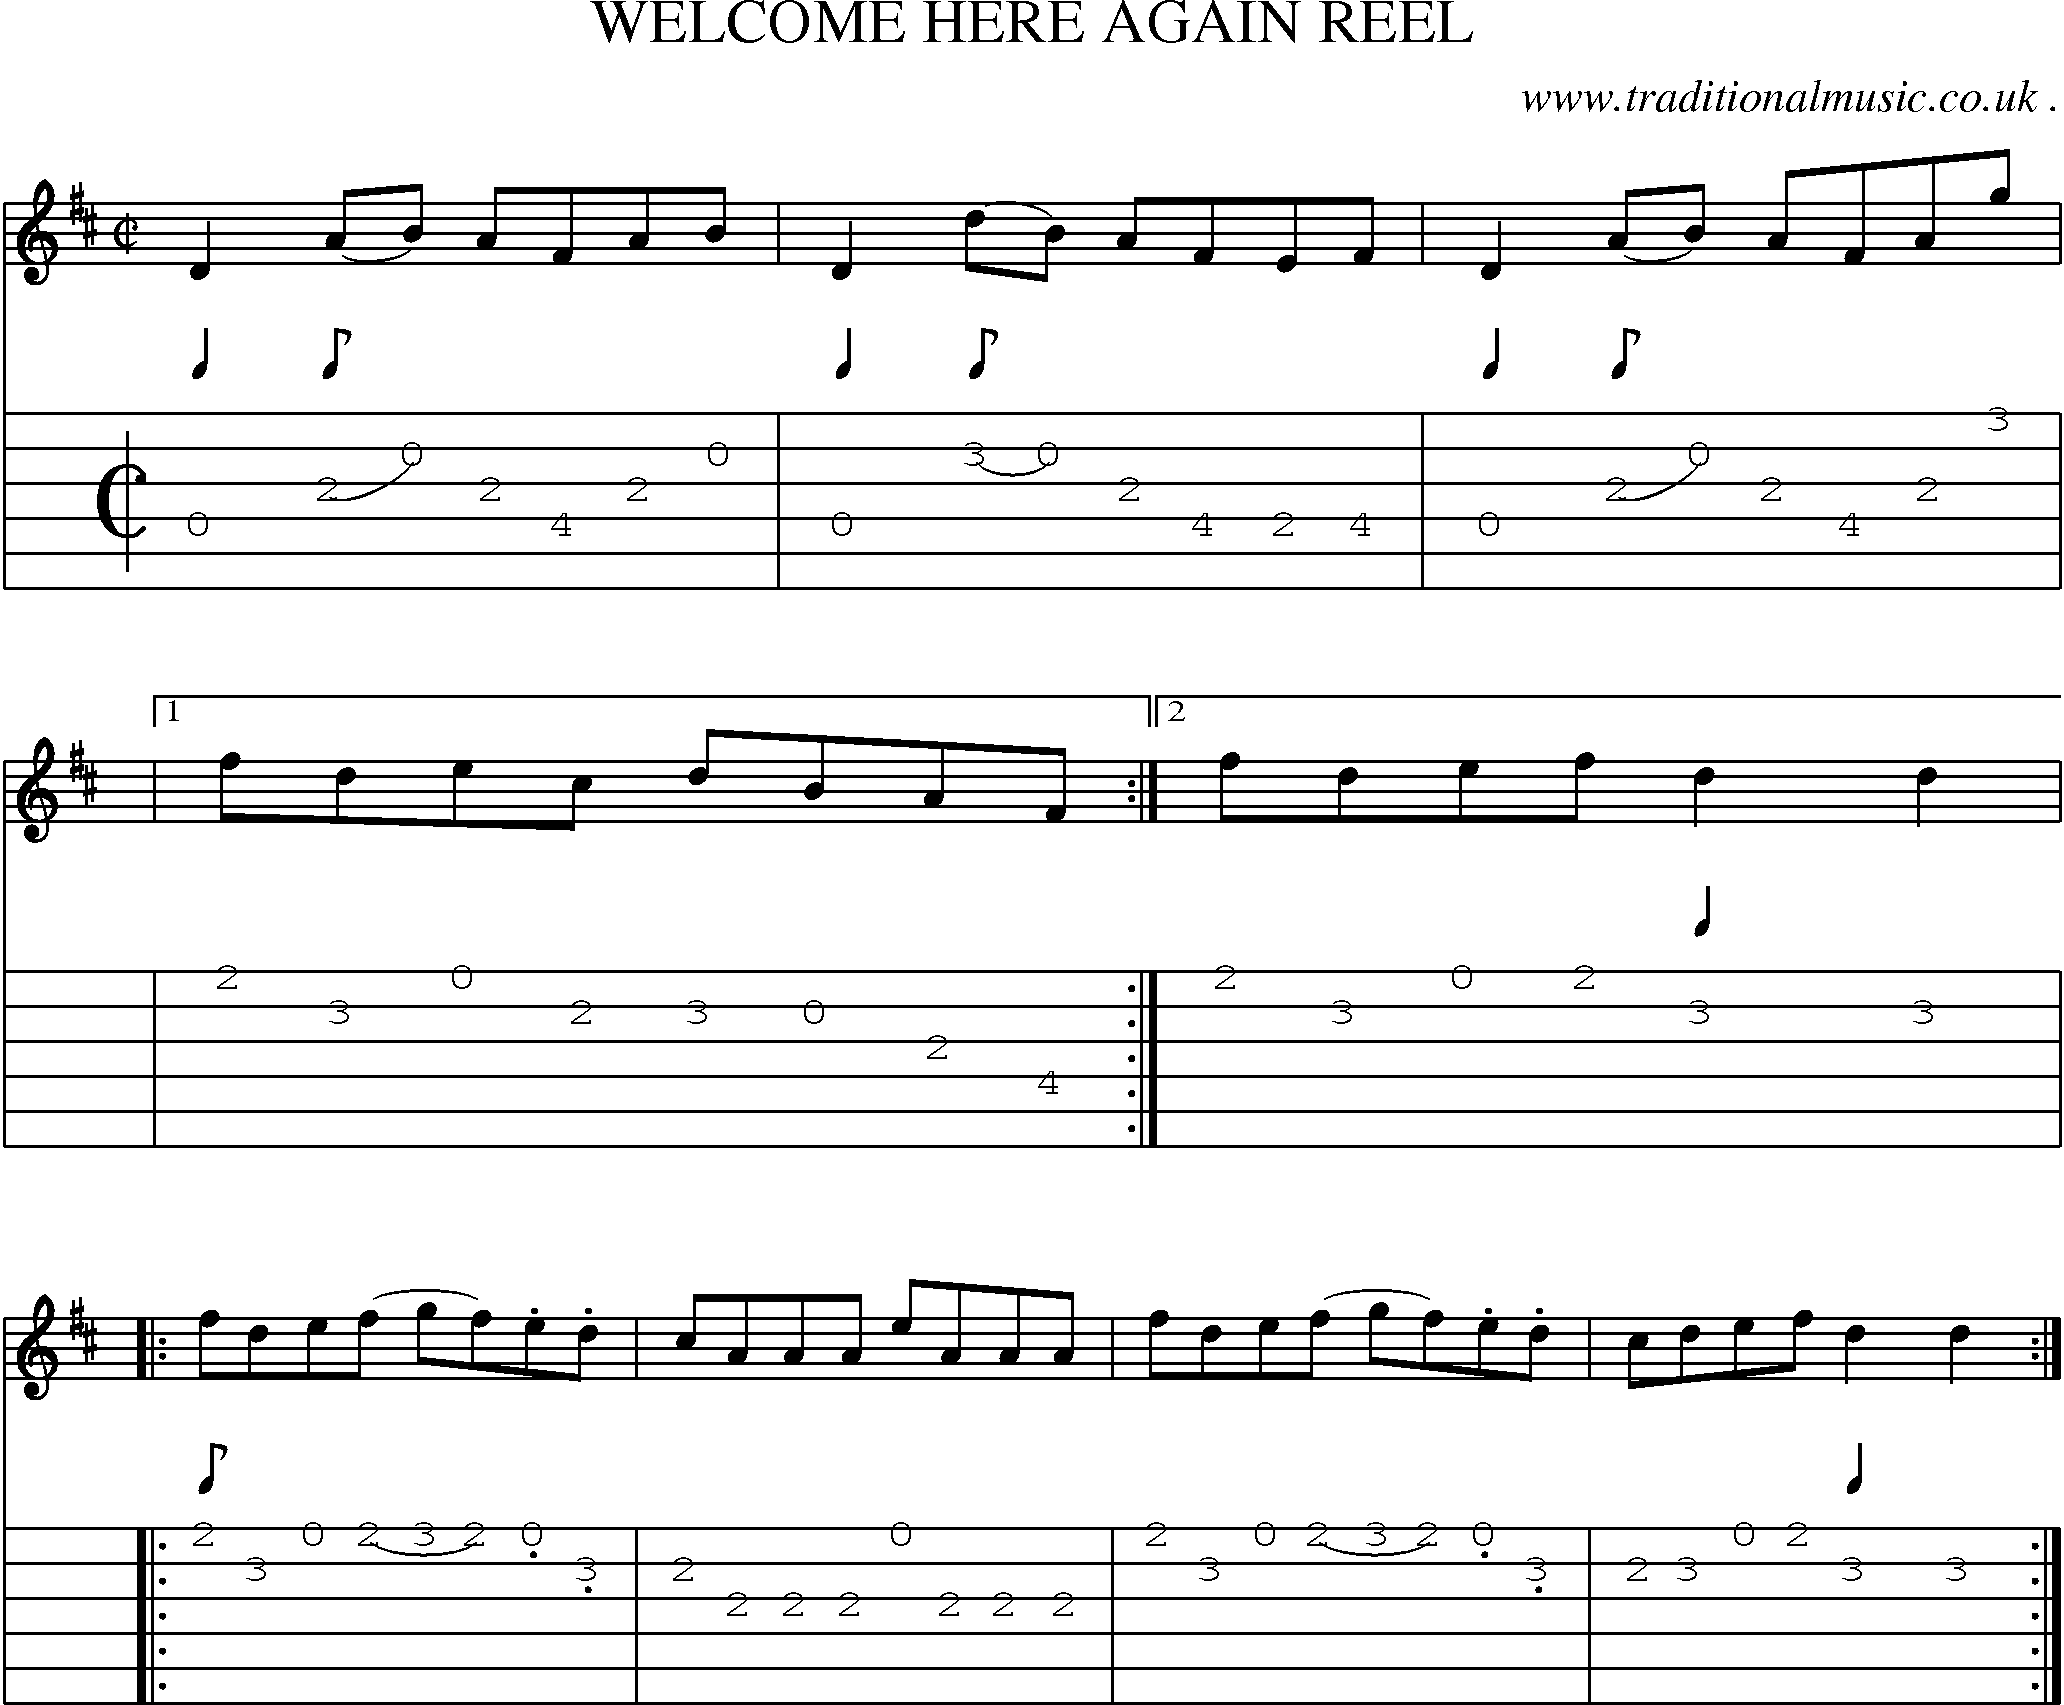 Sheet-Music and Guitar Tabs for Welcome Here Again Reel